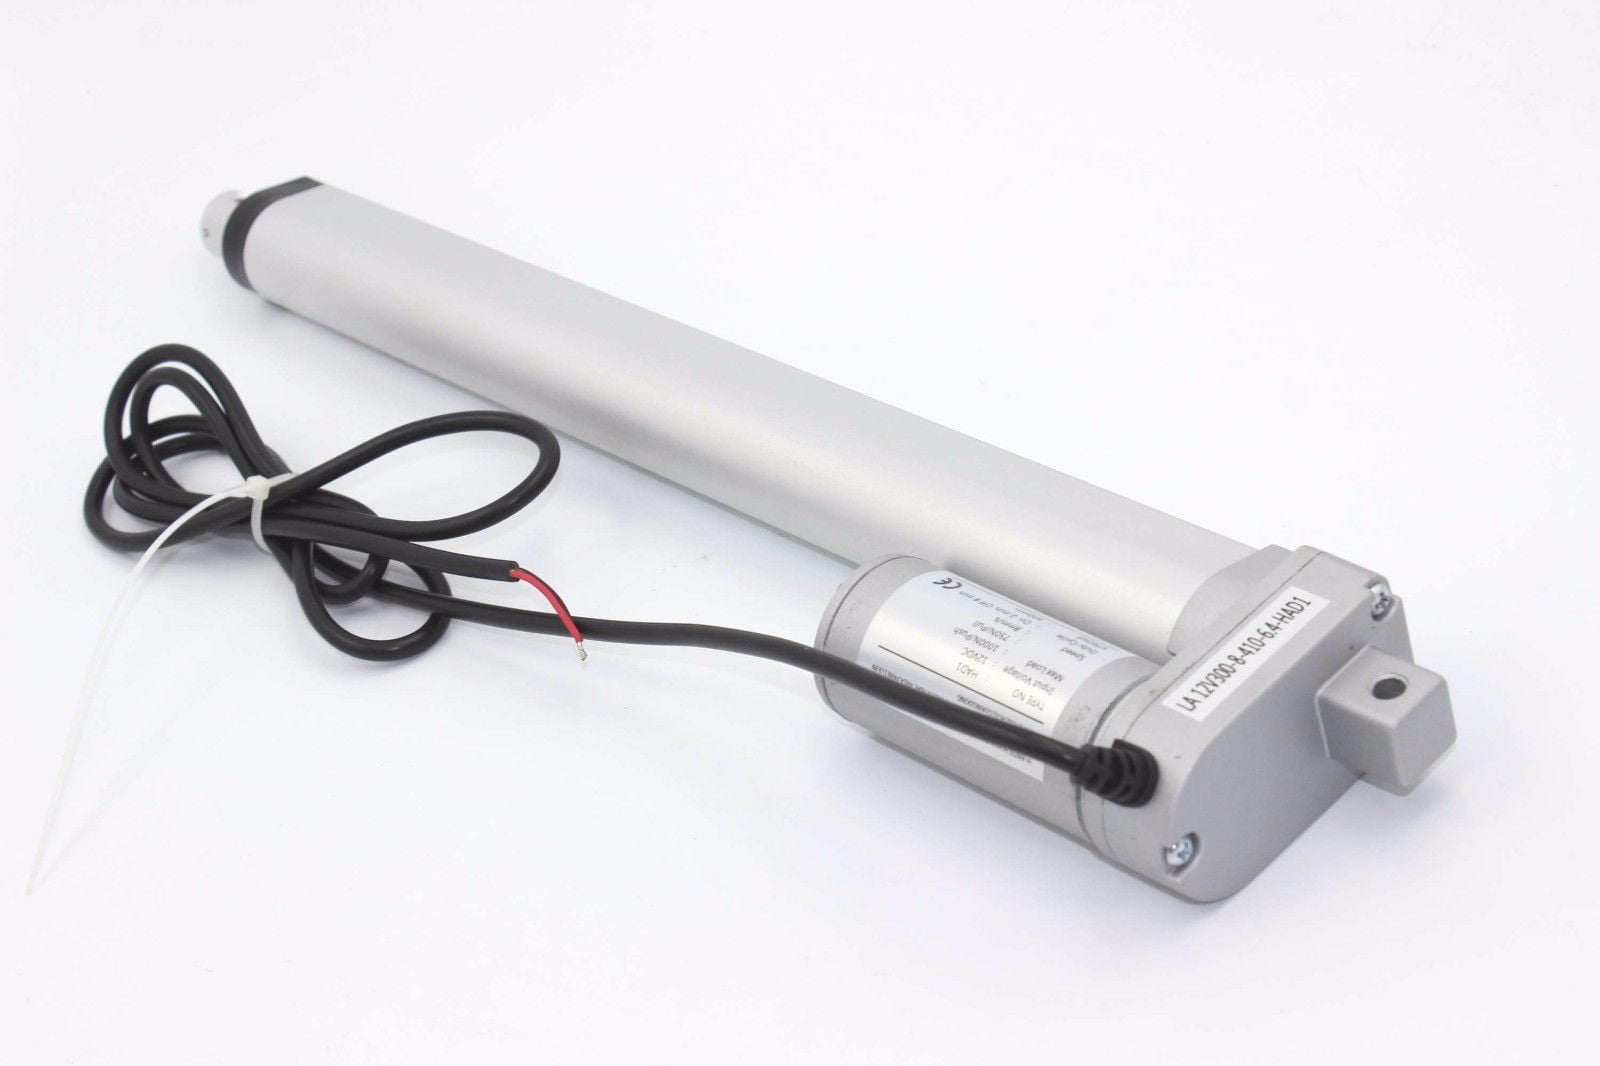 Details about  / Heavy Duty 8/" Linear Actuator W// Wireless Control Kit 12V Motor for Car Boat EL